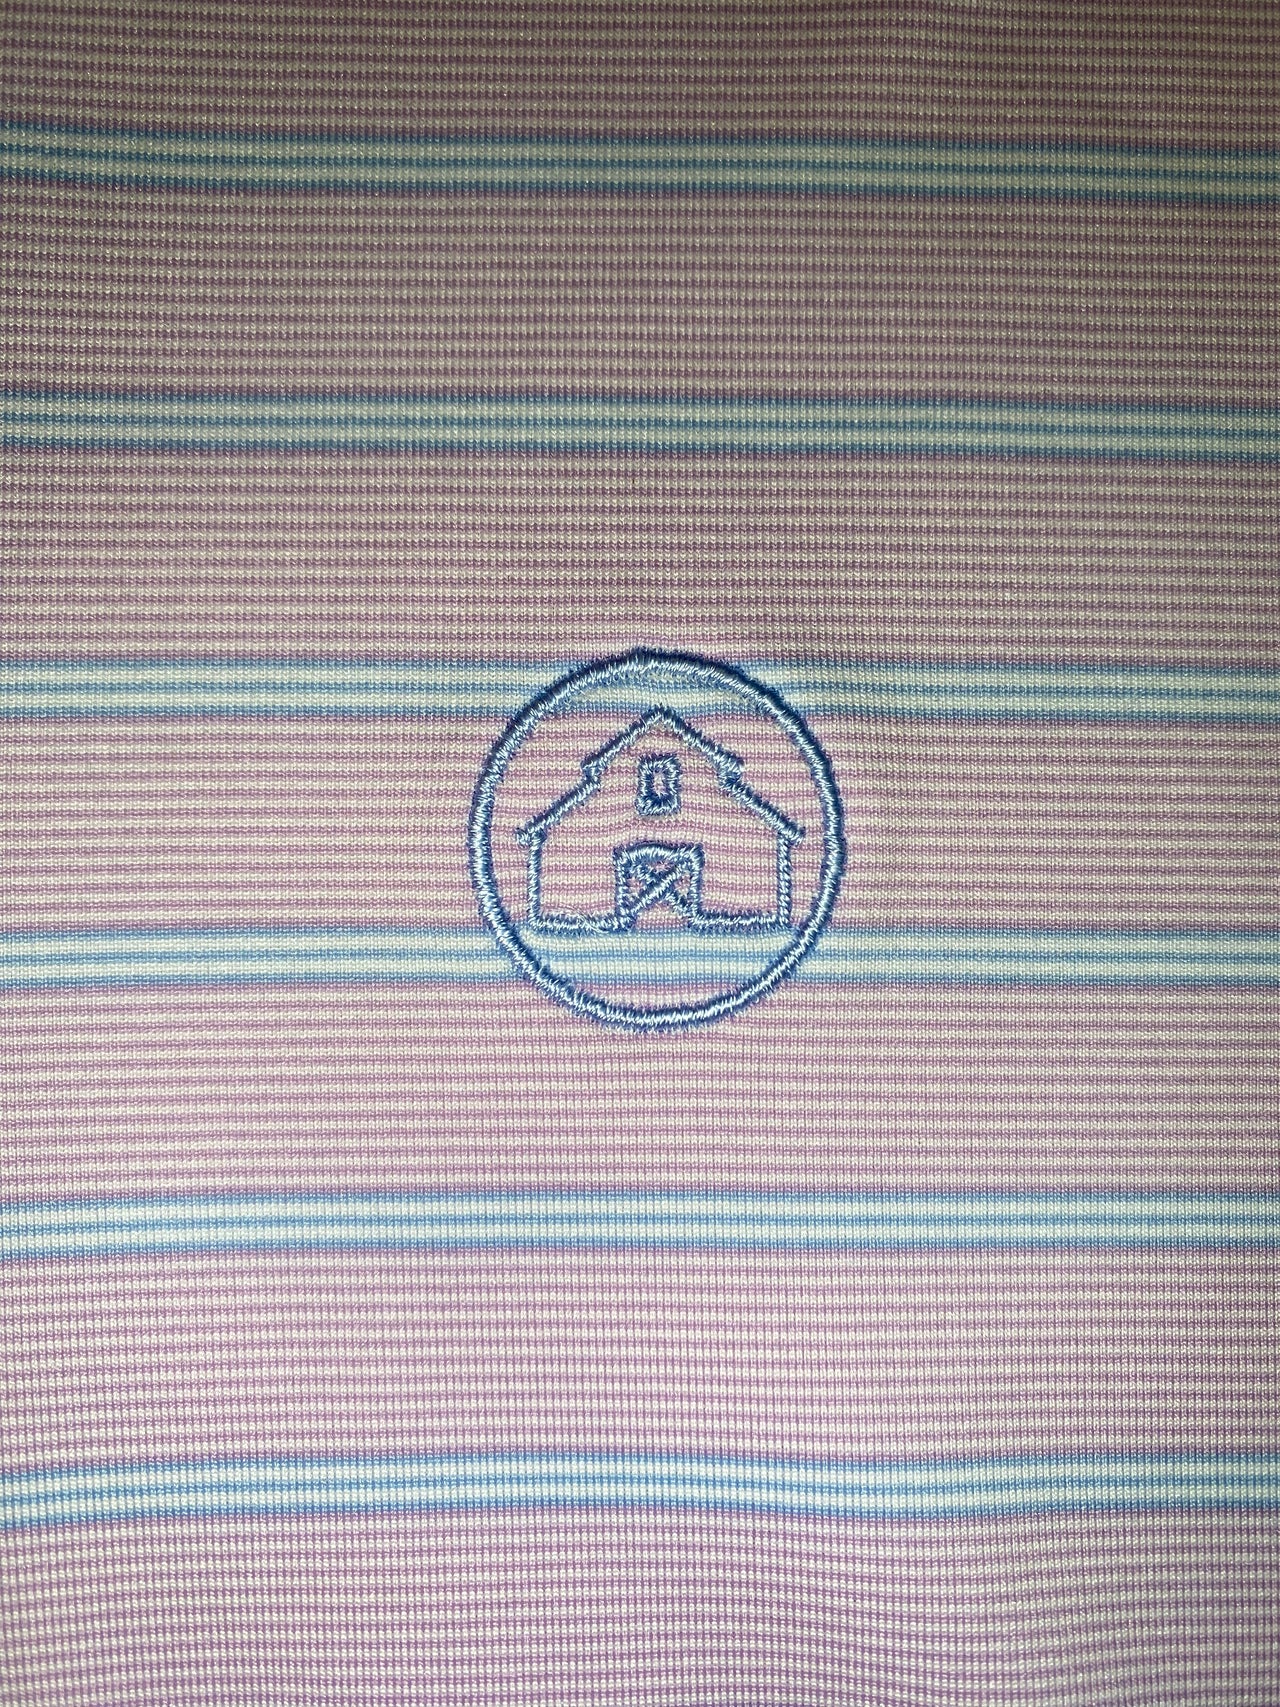 Lilac Striped Performance Polo with Periwinkle and white stripes, 95% Polyester 5% Spandex, open sleeve, self-tailored collar. Ideal for golf, work, or date night.